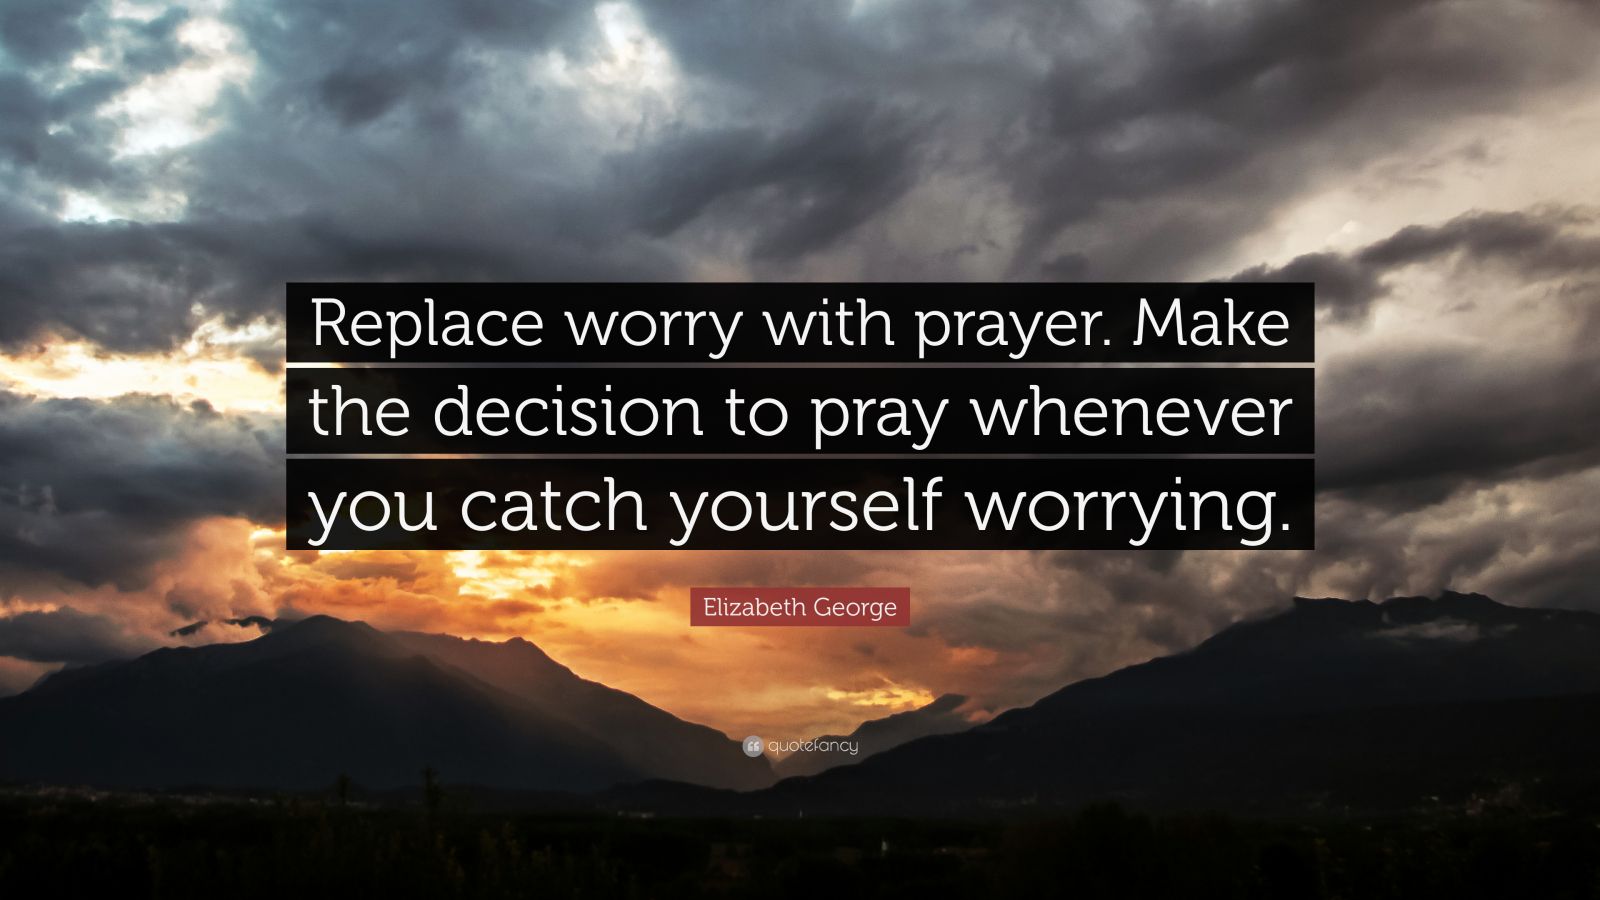 Elizabeth George Quote: “Replace worry with prayer. Make the decision ...